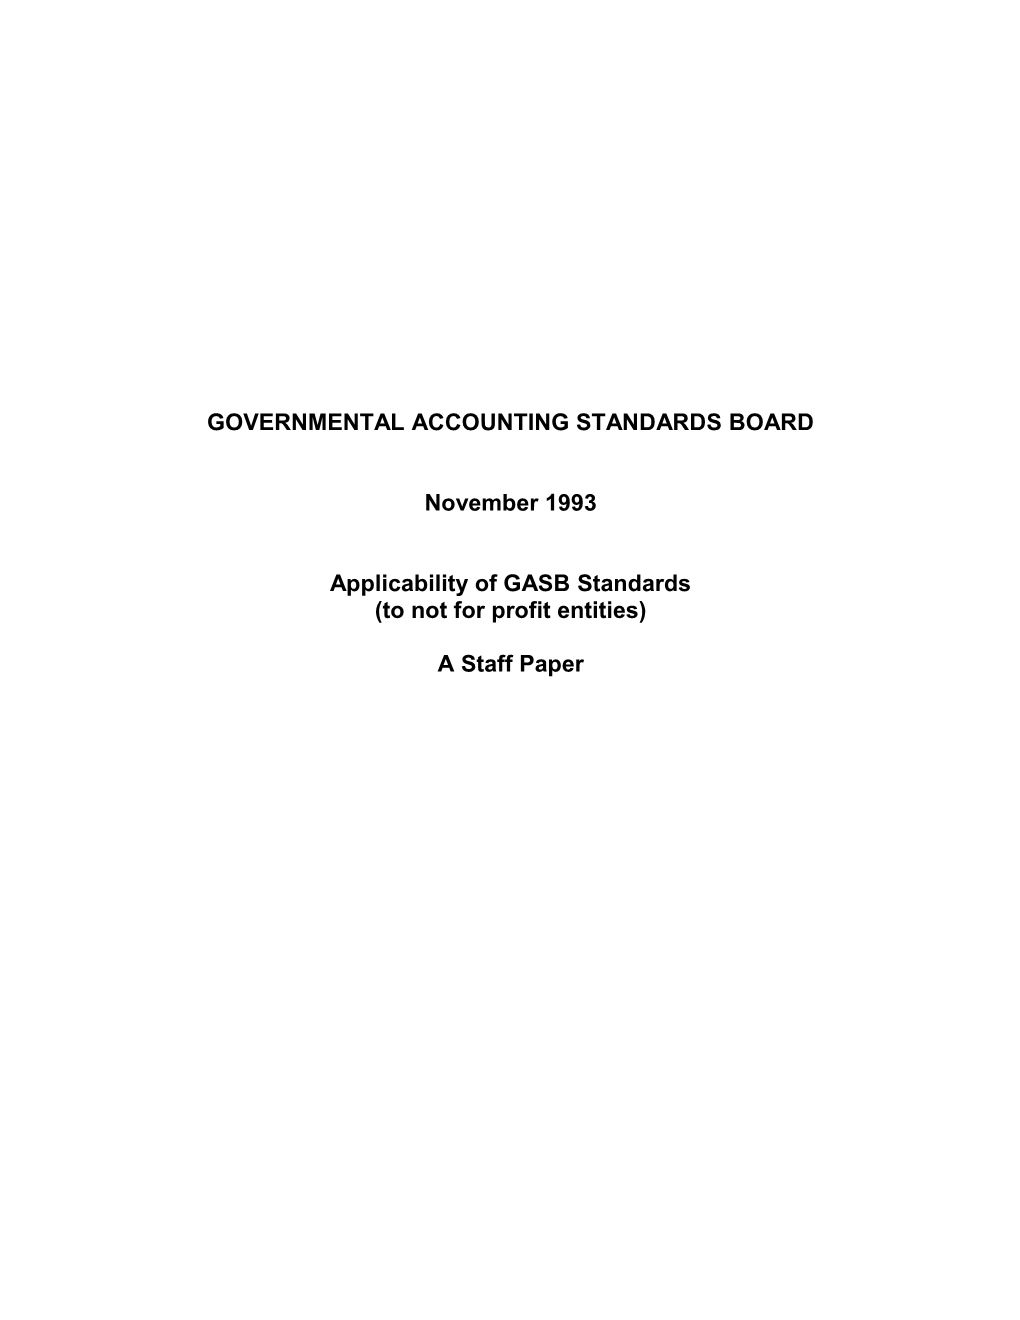 Applicability of GASB Standards